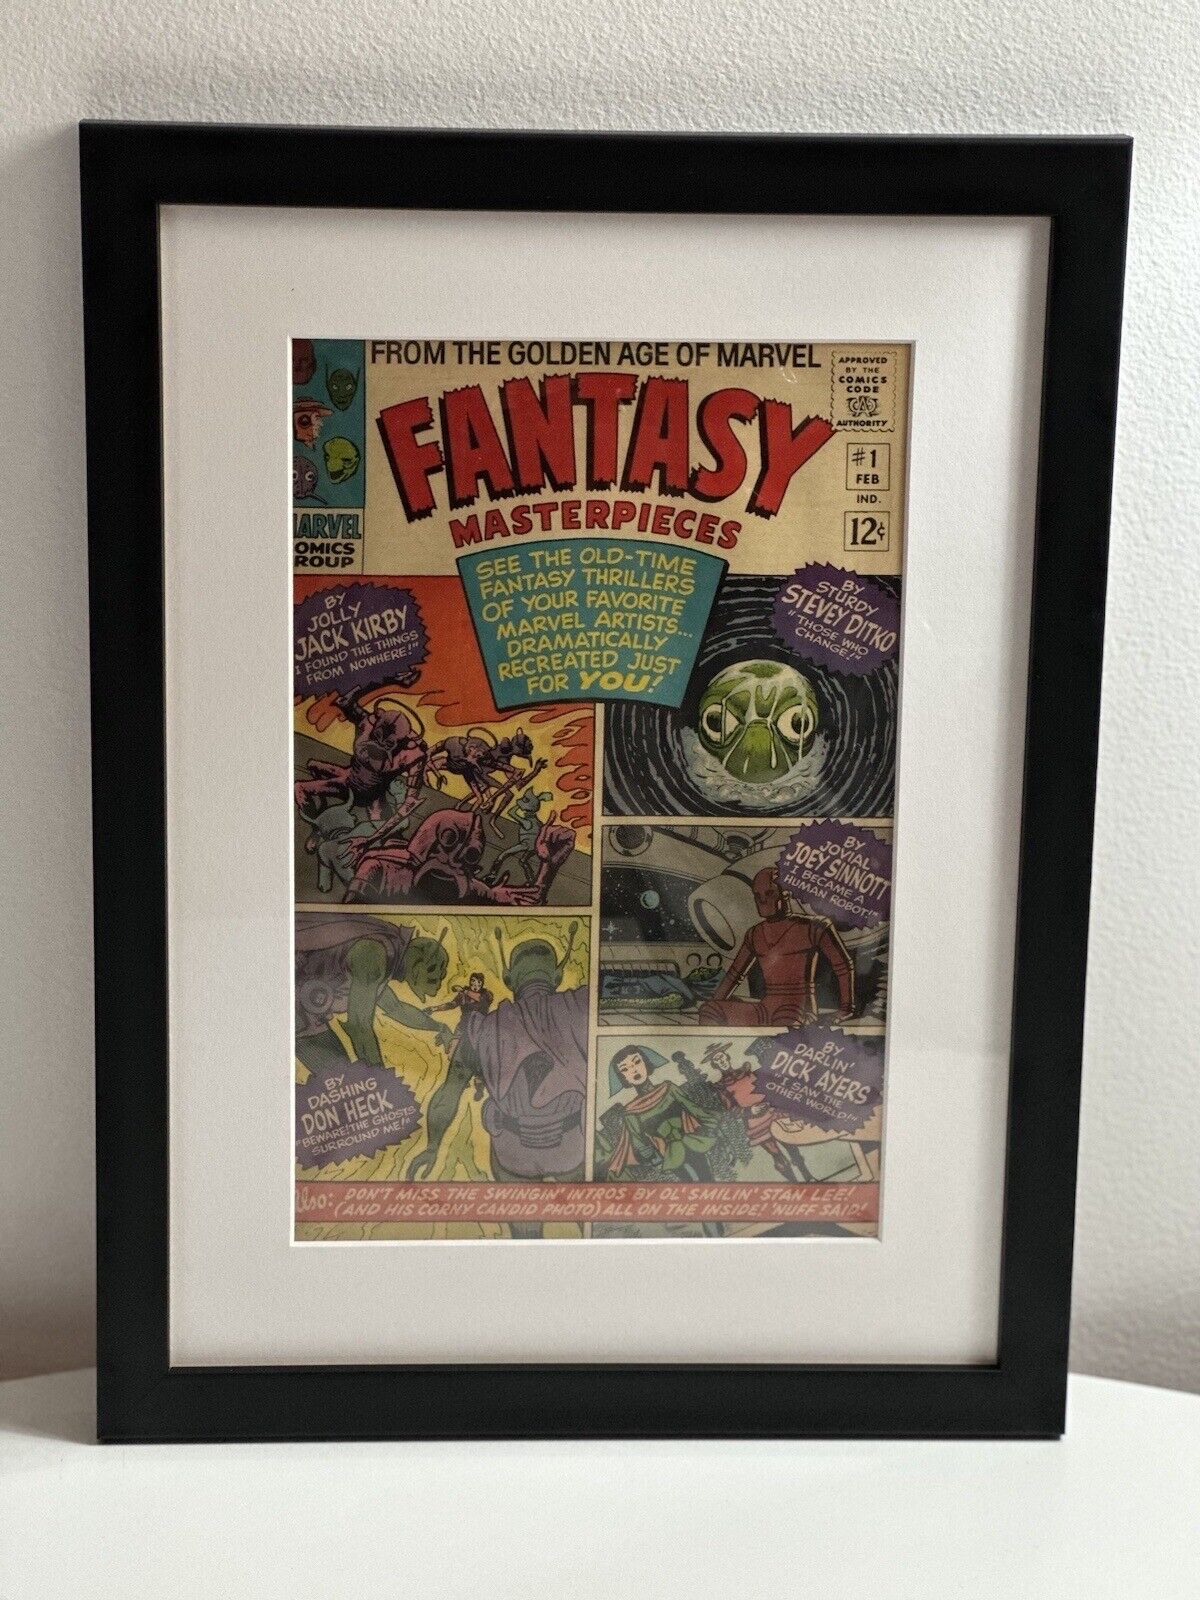 COLLECTORS DREAM FRAMED FANTASY MASTERPIECES reprint #1 GOLDEN AGE OF MARVEL